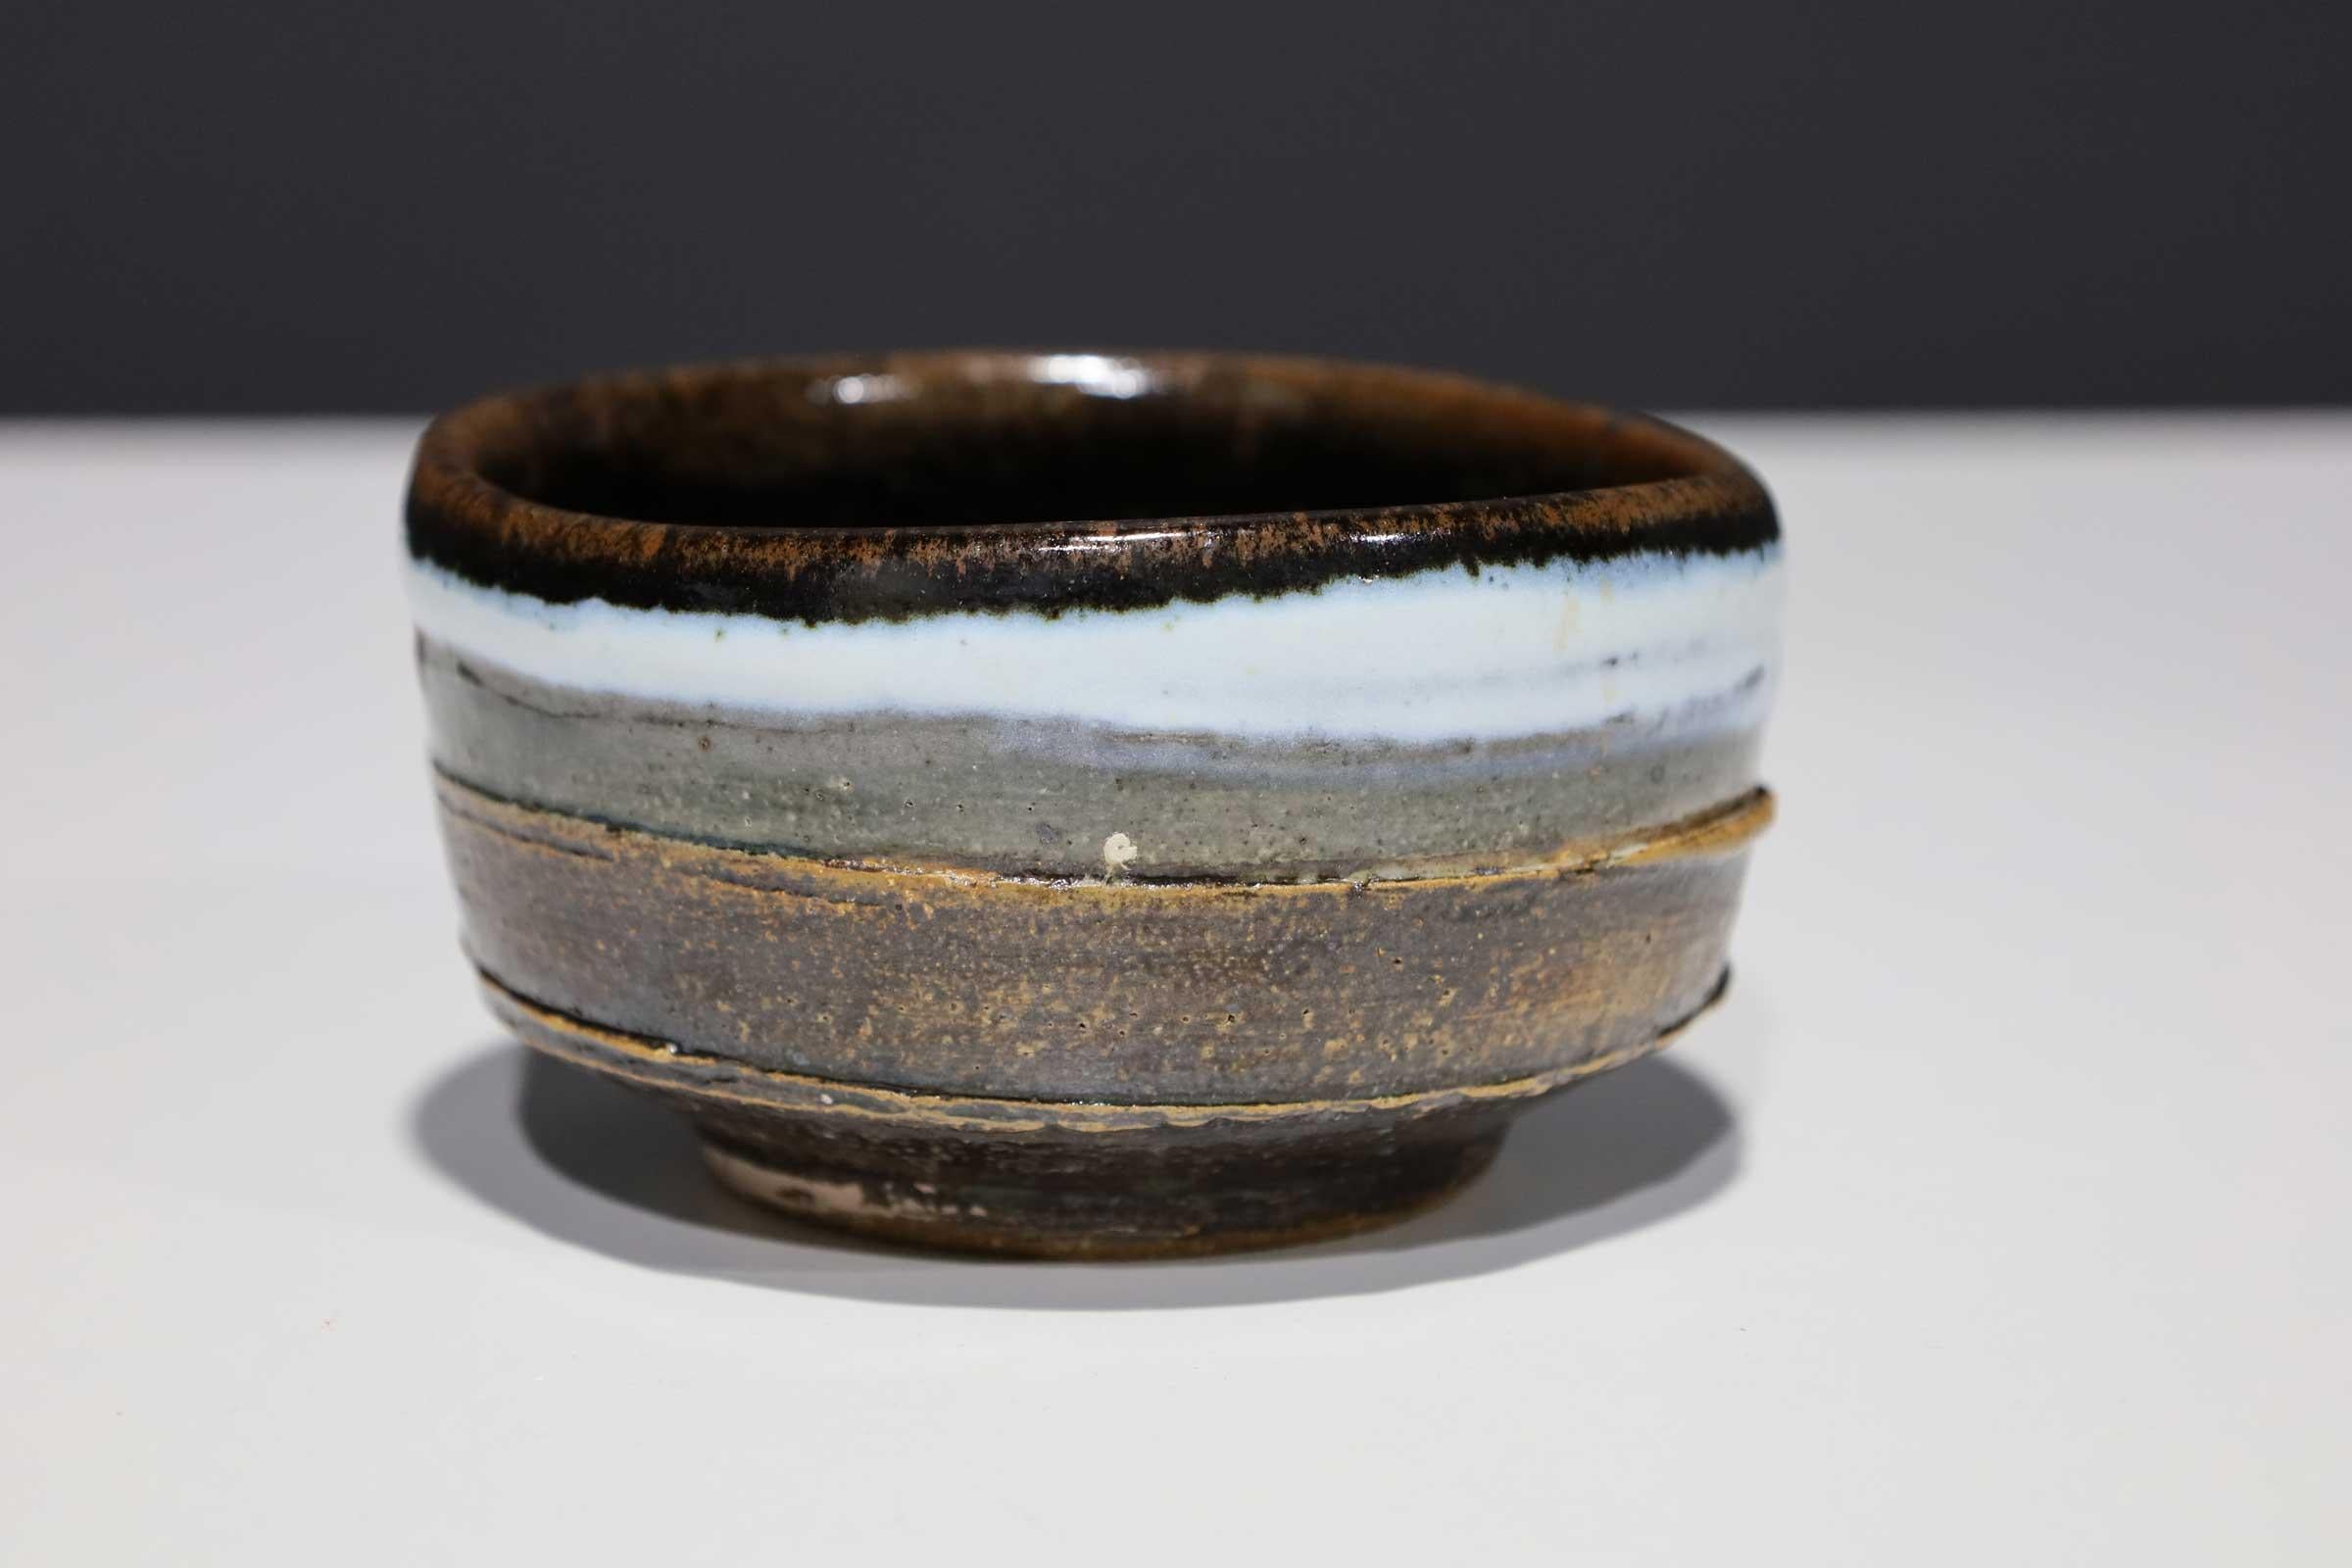 A potter and painter, Albert Green (1914 - 1994) earned an international reputation for his ceramics, stoneware, and canvases. A graduate of the University of Pennsylvania, he studied painting at the Art Students League in New York City, supporting